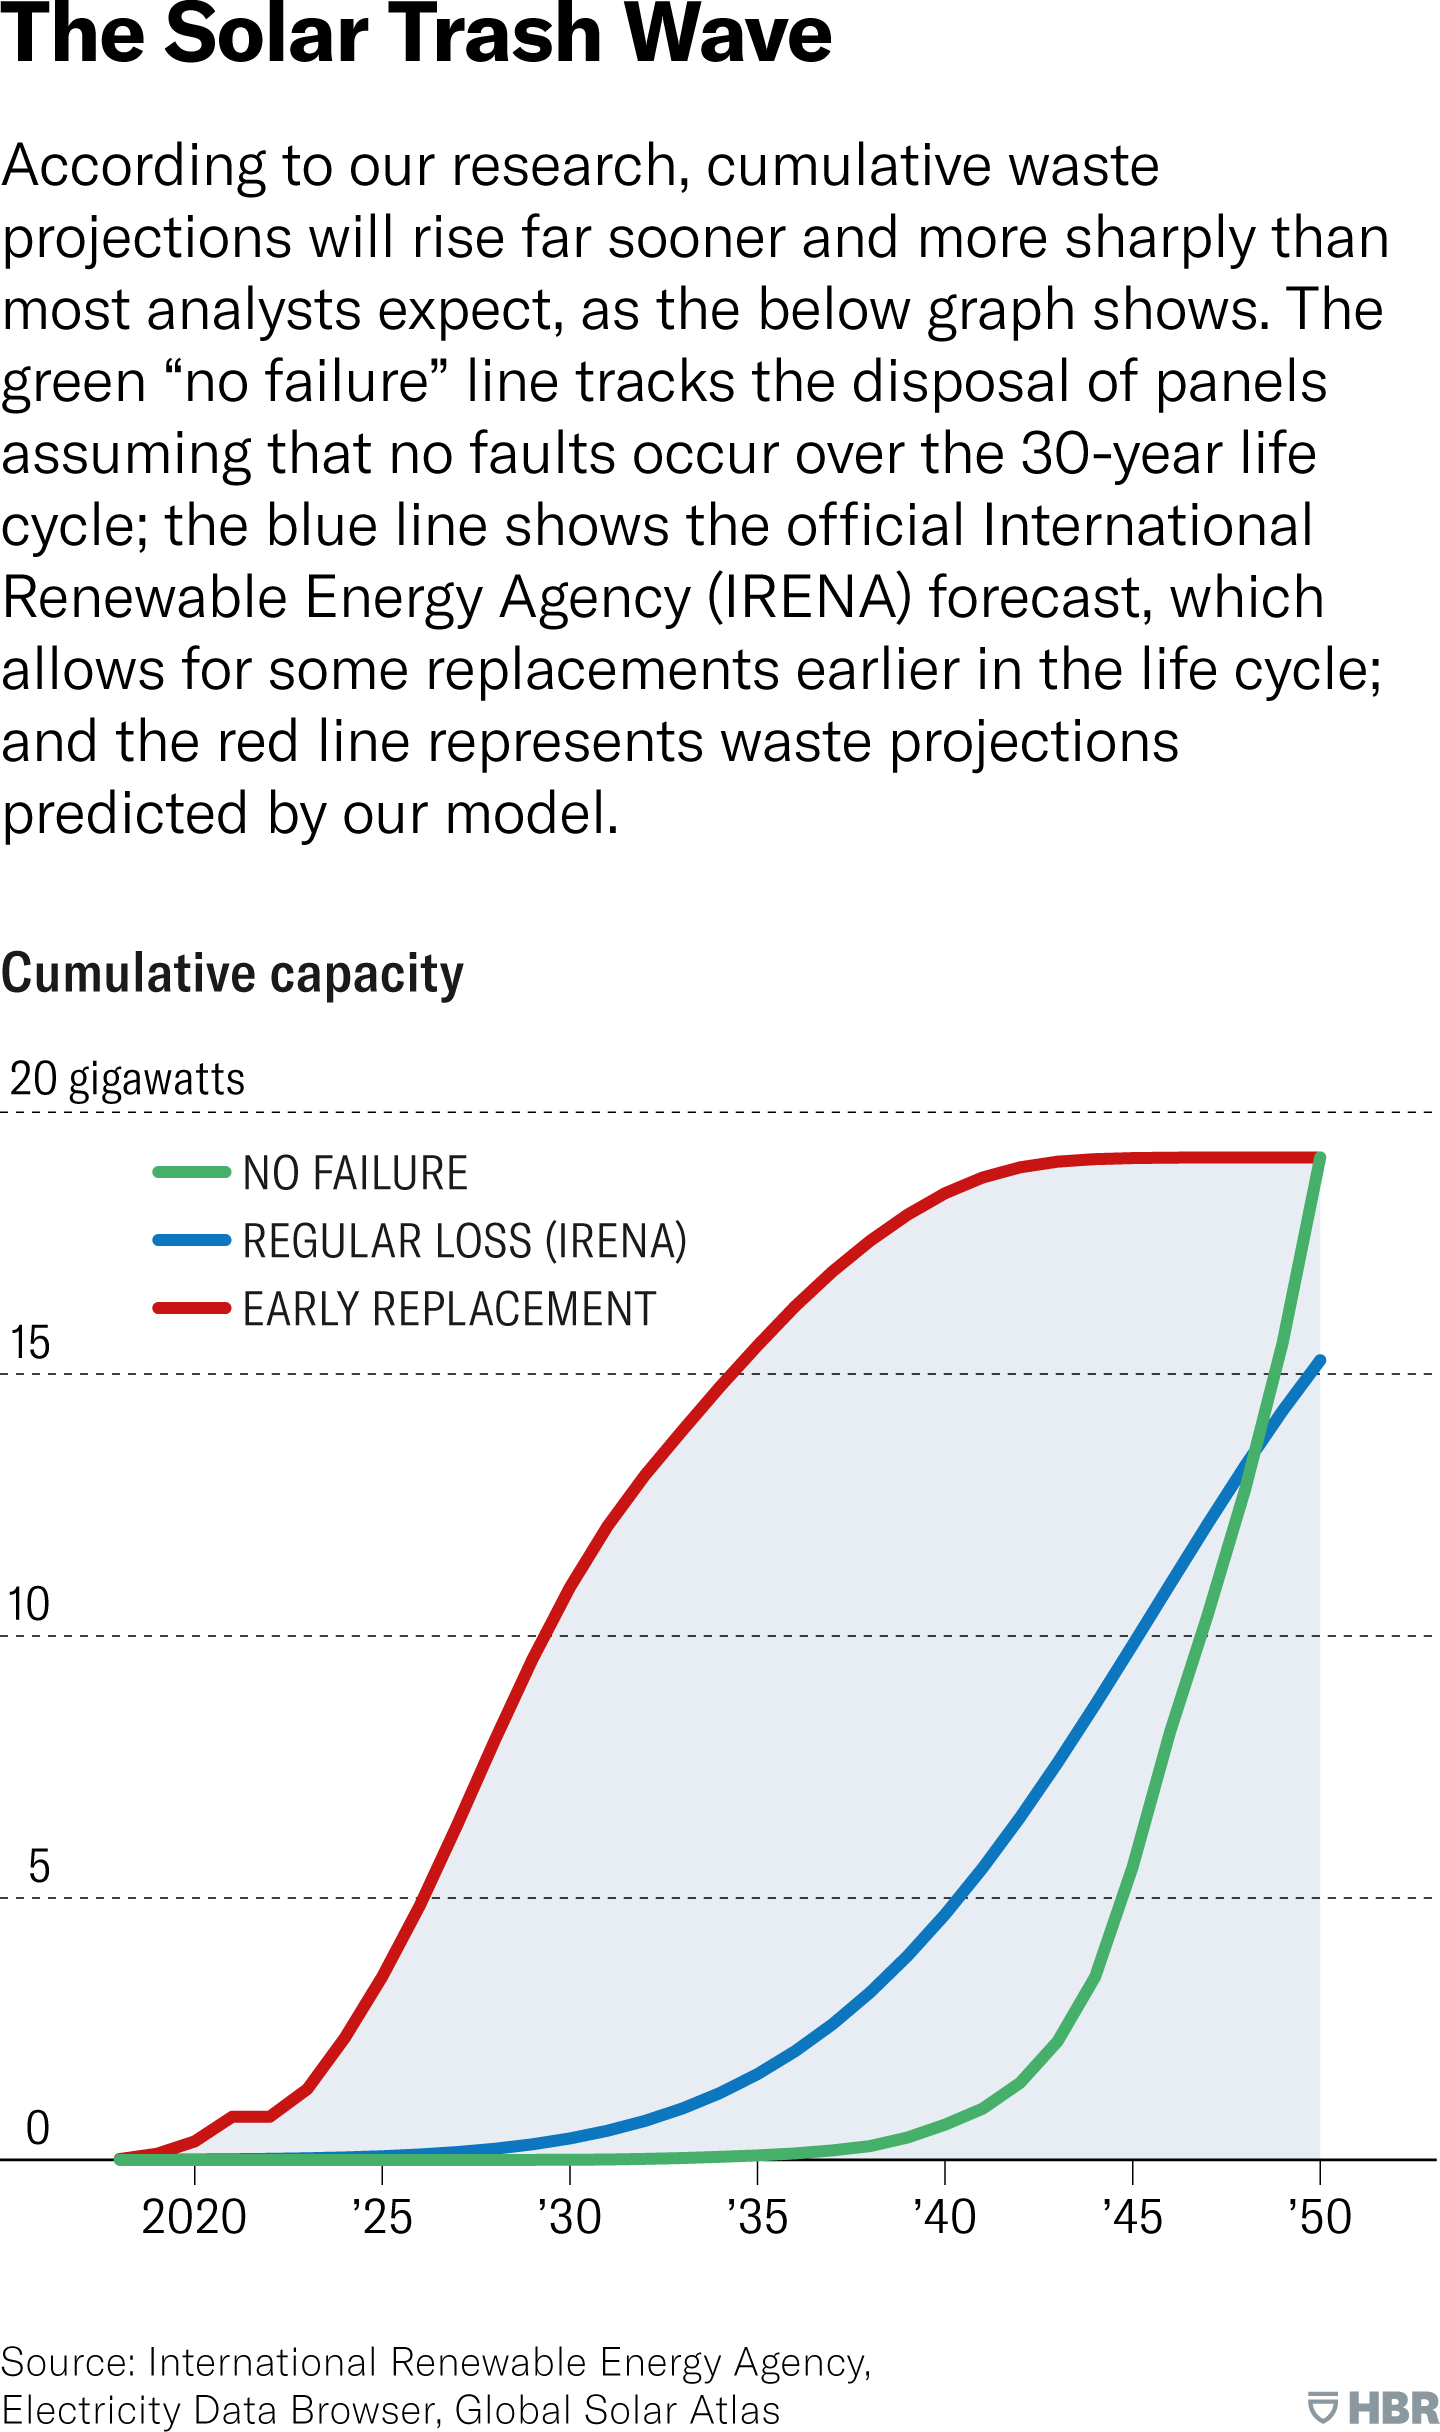 The Solar Trash Wave. According to our research, cumulative waste projections will rise far sooner and more sharply than most analysts expect. A line graph shows the cumulative capacity of solar panel waste from 2020 to 2050 in three different scenarios. Assuming that no faults occur over the 30-year life cycle of the equipment, waste does not begin to accumulate until around 2040 and then rises sharply to nearly 20 gigawatts by 2050. A second scenario shows the official forecast from the International Renewable Energy Agency, known as IRENA, which allows for some replacements earlier in the life cycle. In this case, solar panel waste begins to accumulate around 2030, rising steadily to about 15 gigawatts by 2050. A third scenario, which represents waste projections predicted by our model and is based on early replacement of solar panels, shows waste beginning to accumulate almost immediately, by 2023, and rising sharply to reach nearly 20 gigawatts by 2040. Source: International Renewable Energy Agency, Electricity Data Browser, Global Solar Atlas.